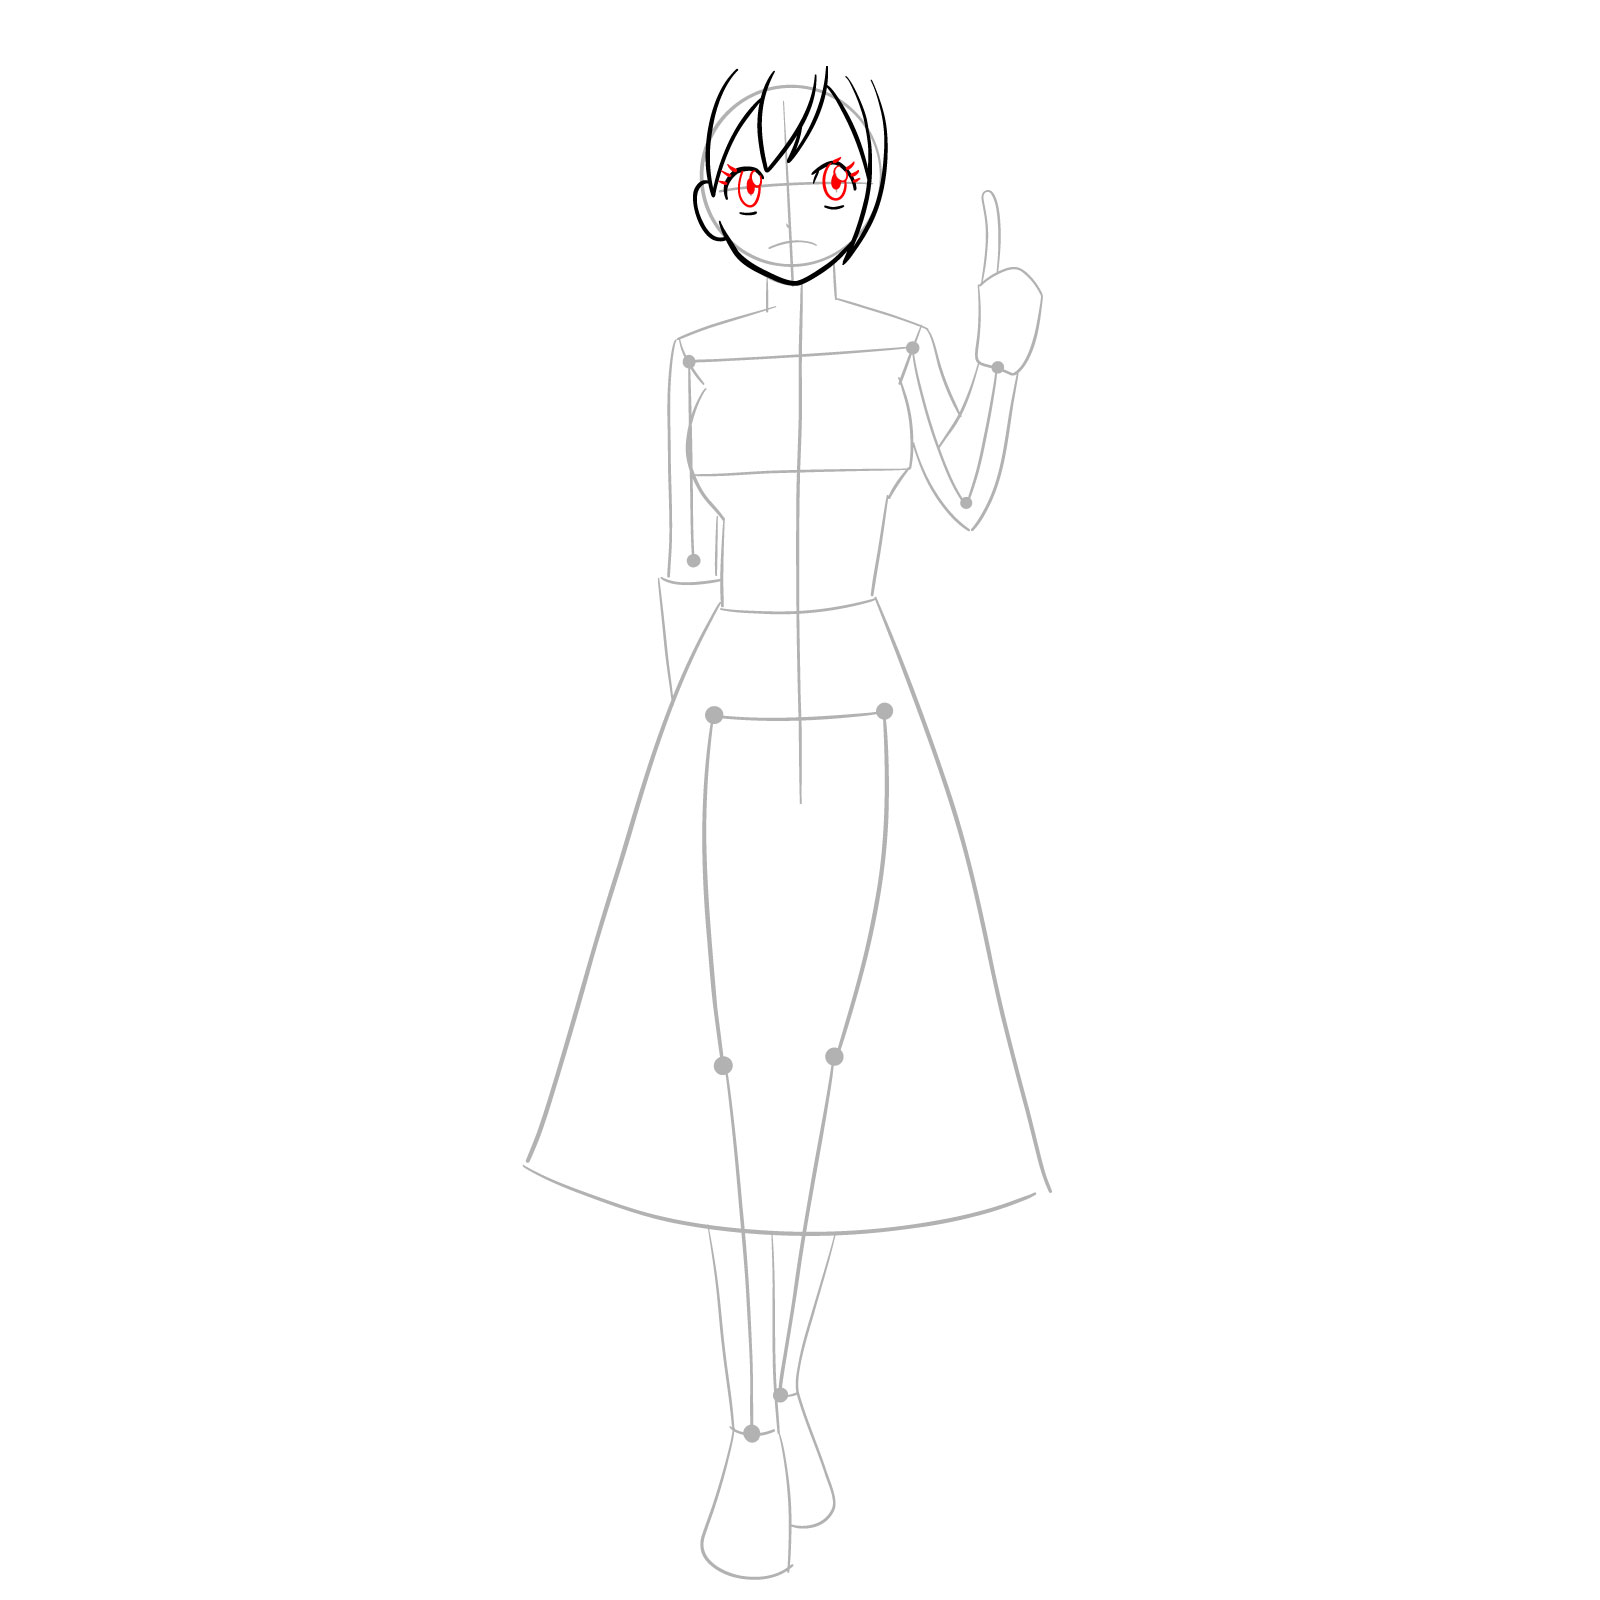 How to draw Lisanna Strauss from Fairy Tail - step 08